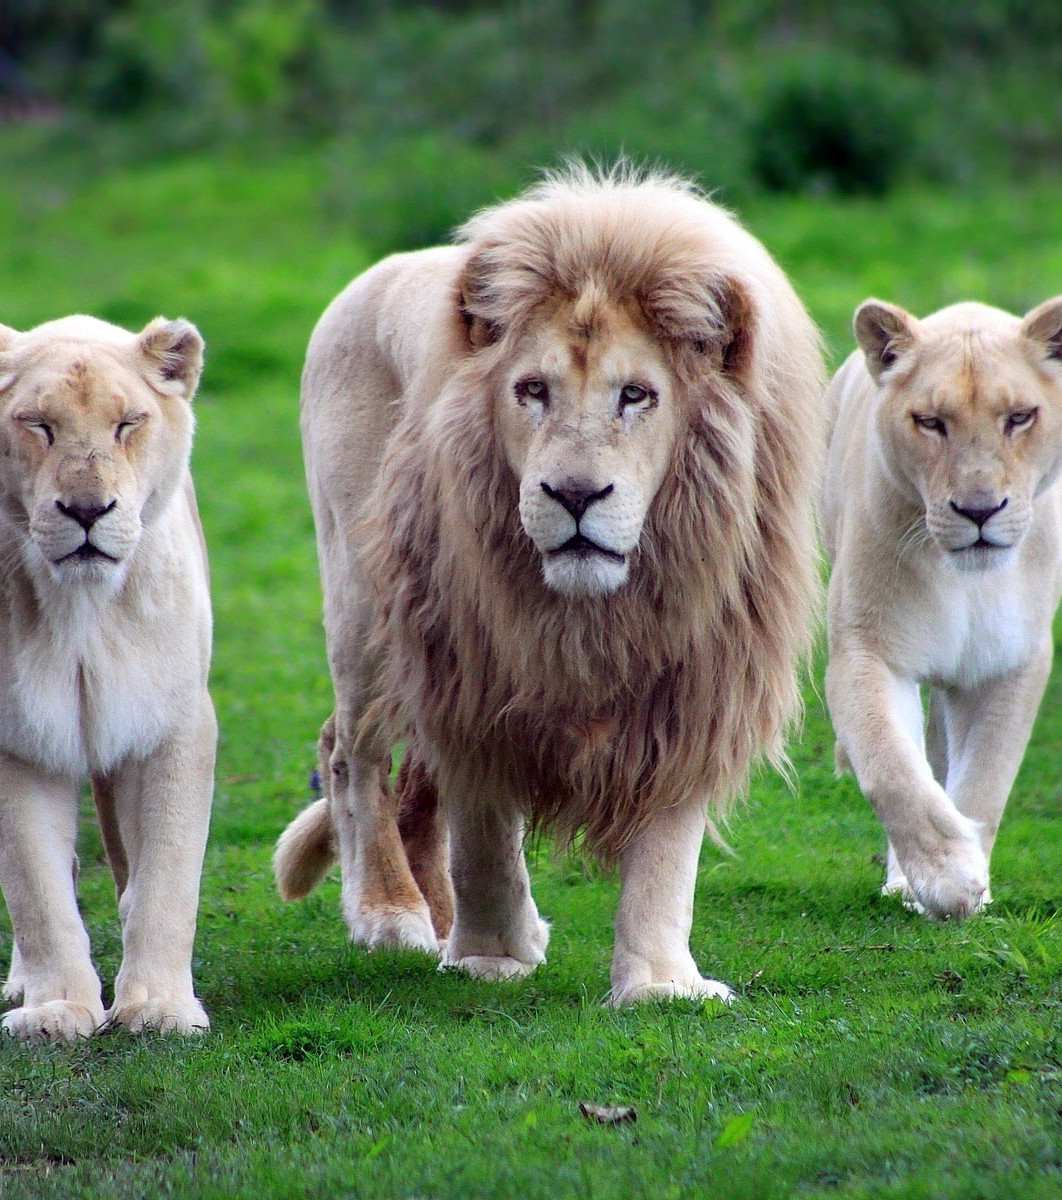 Why Are Lions Considered King Of The Jungle